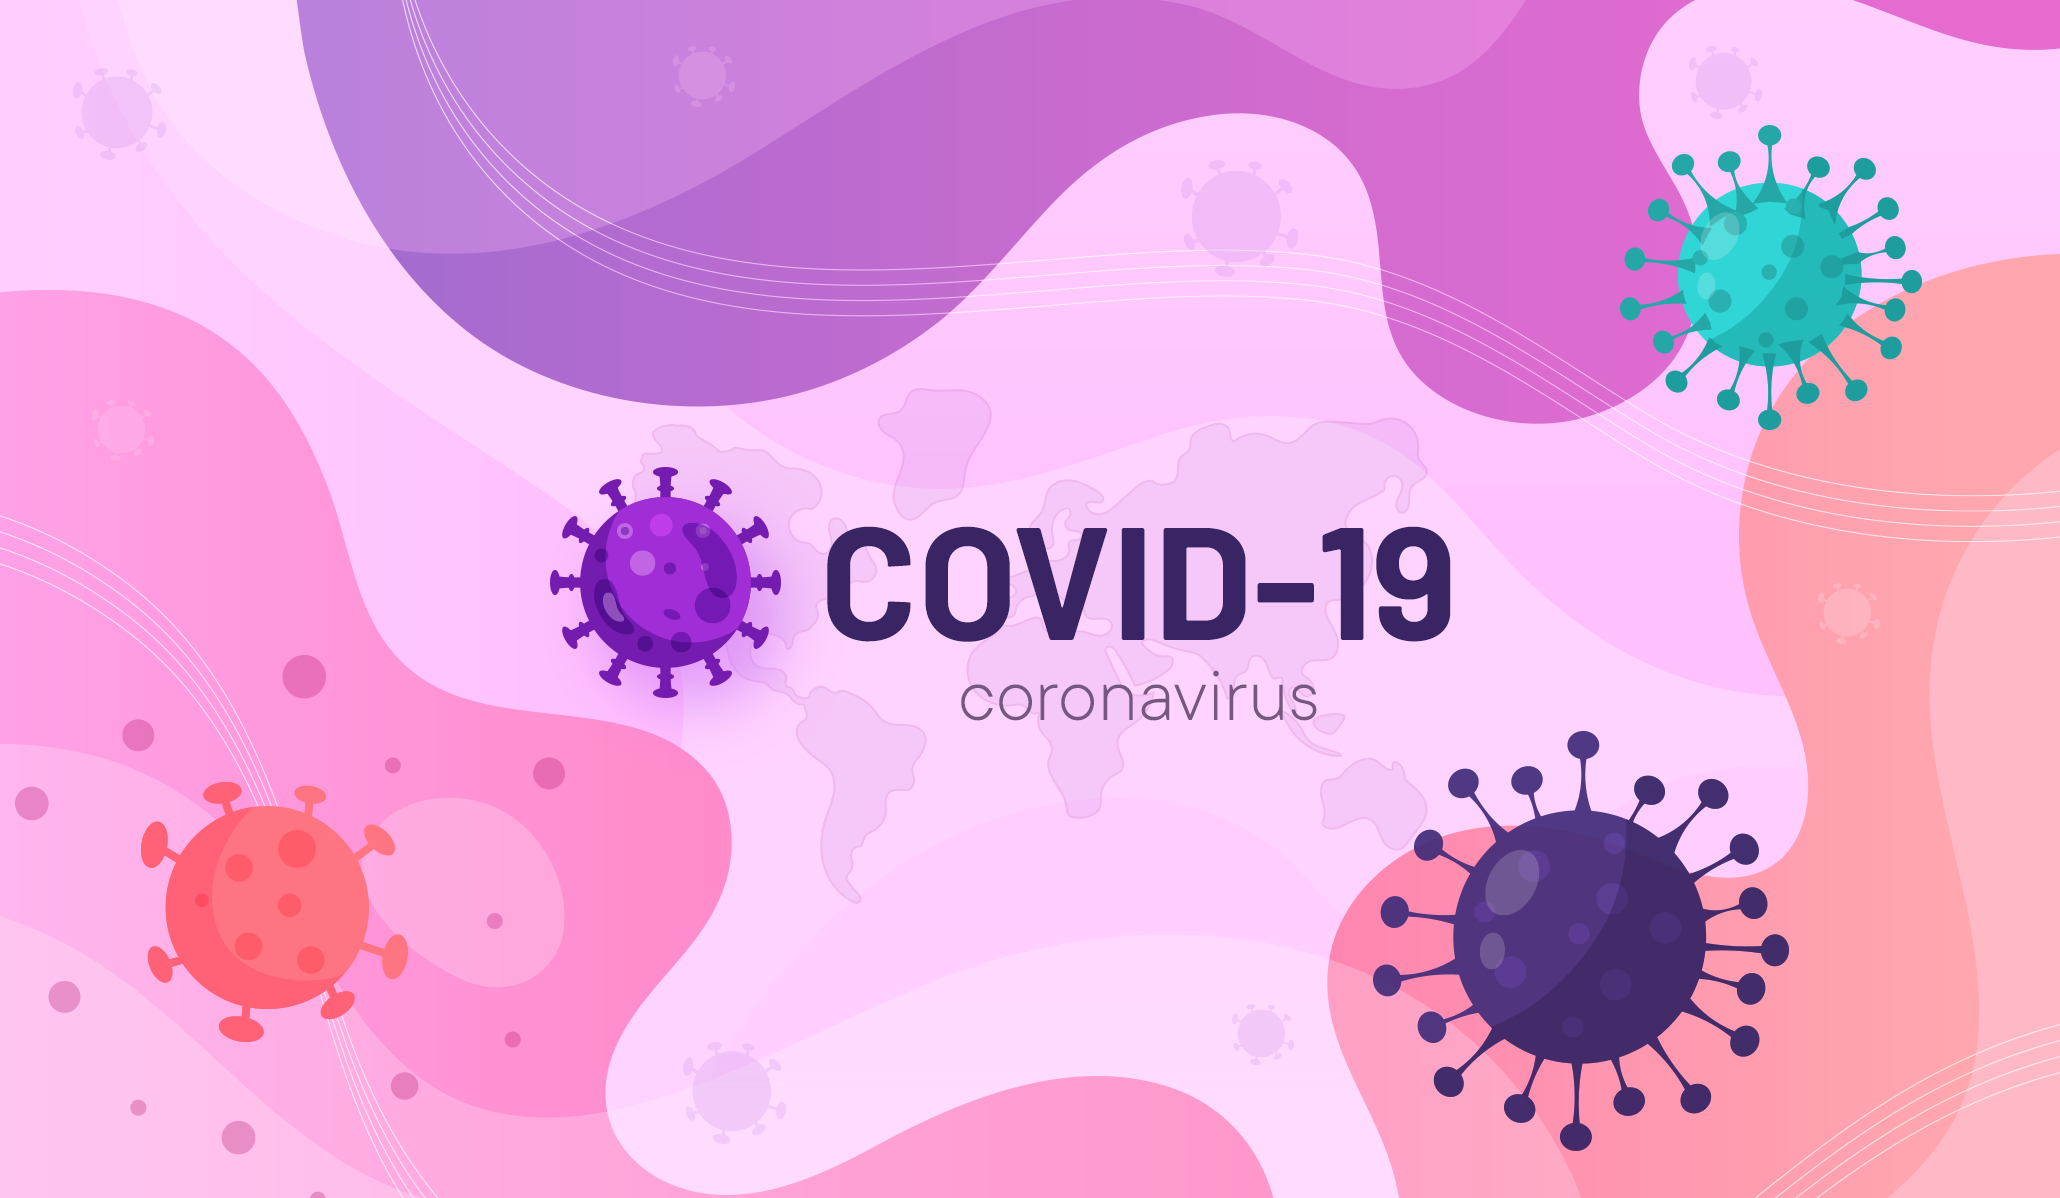 Our response and readiness for business continuity during the Coronavirus (COVID-19) pandemic